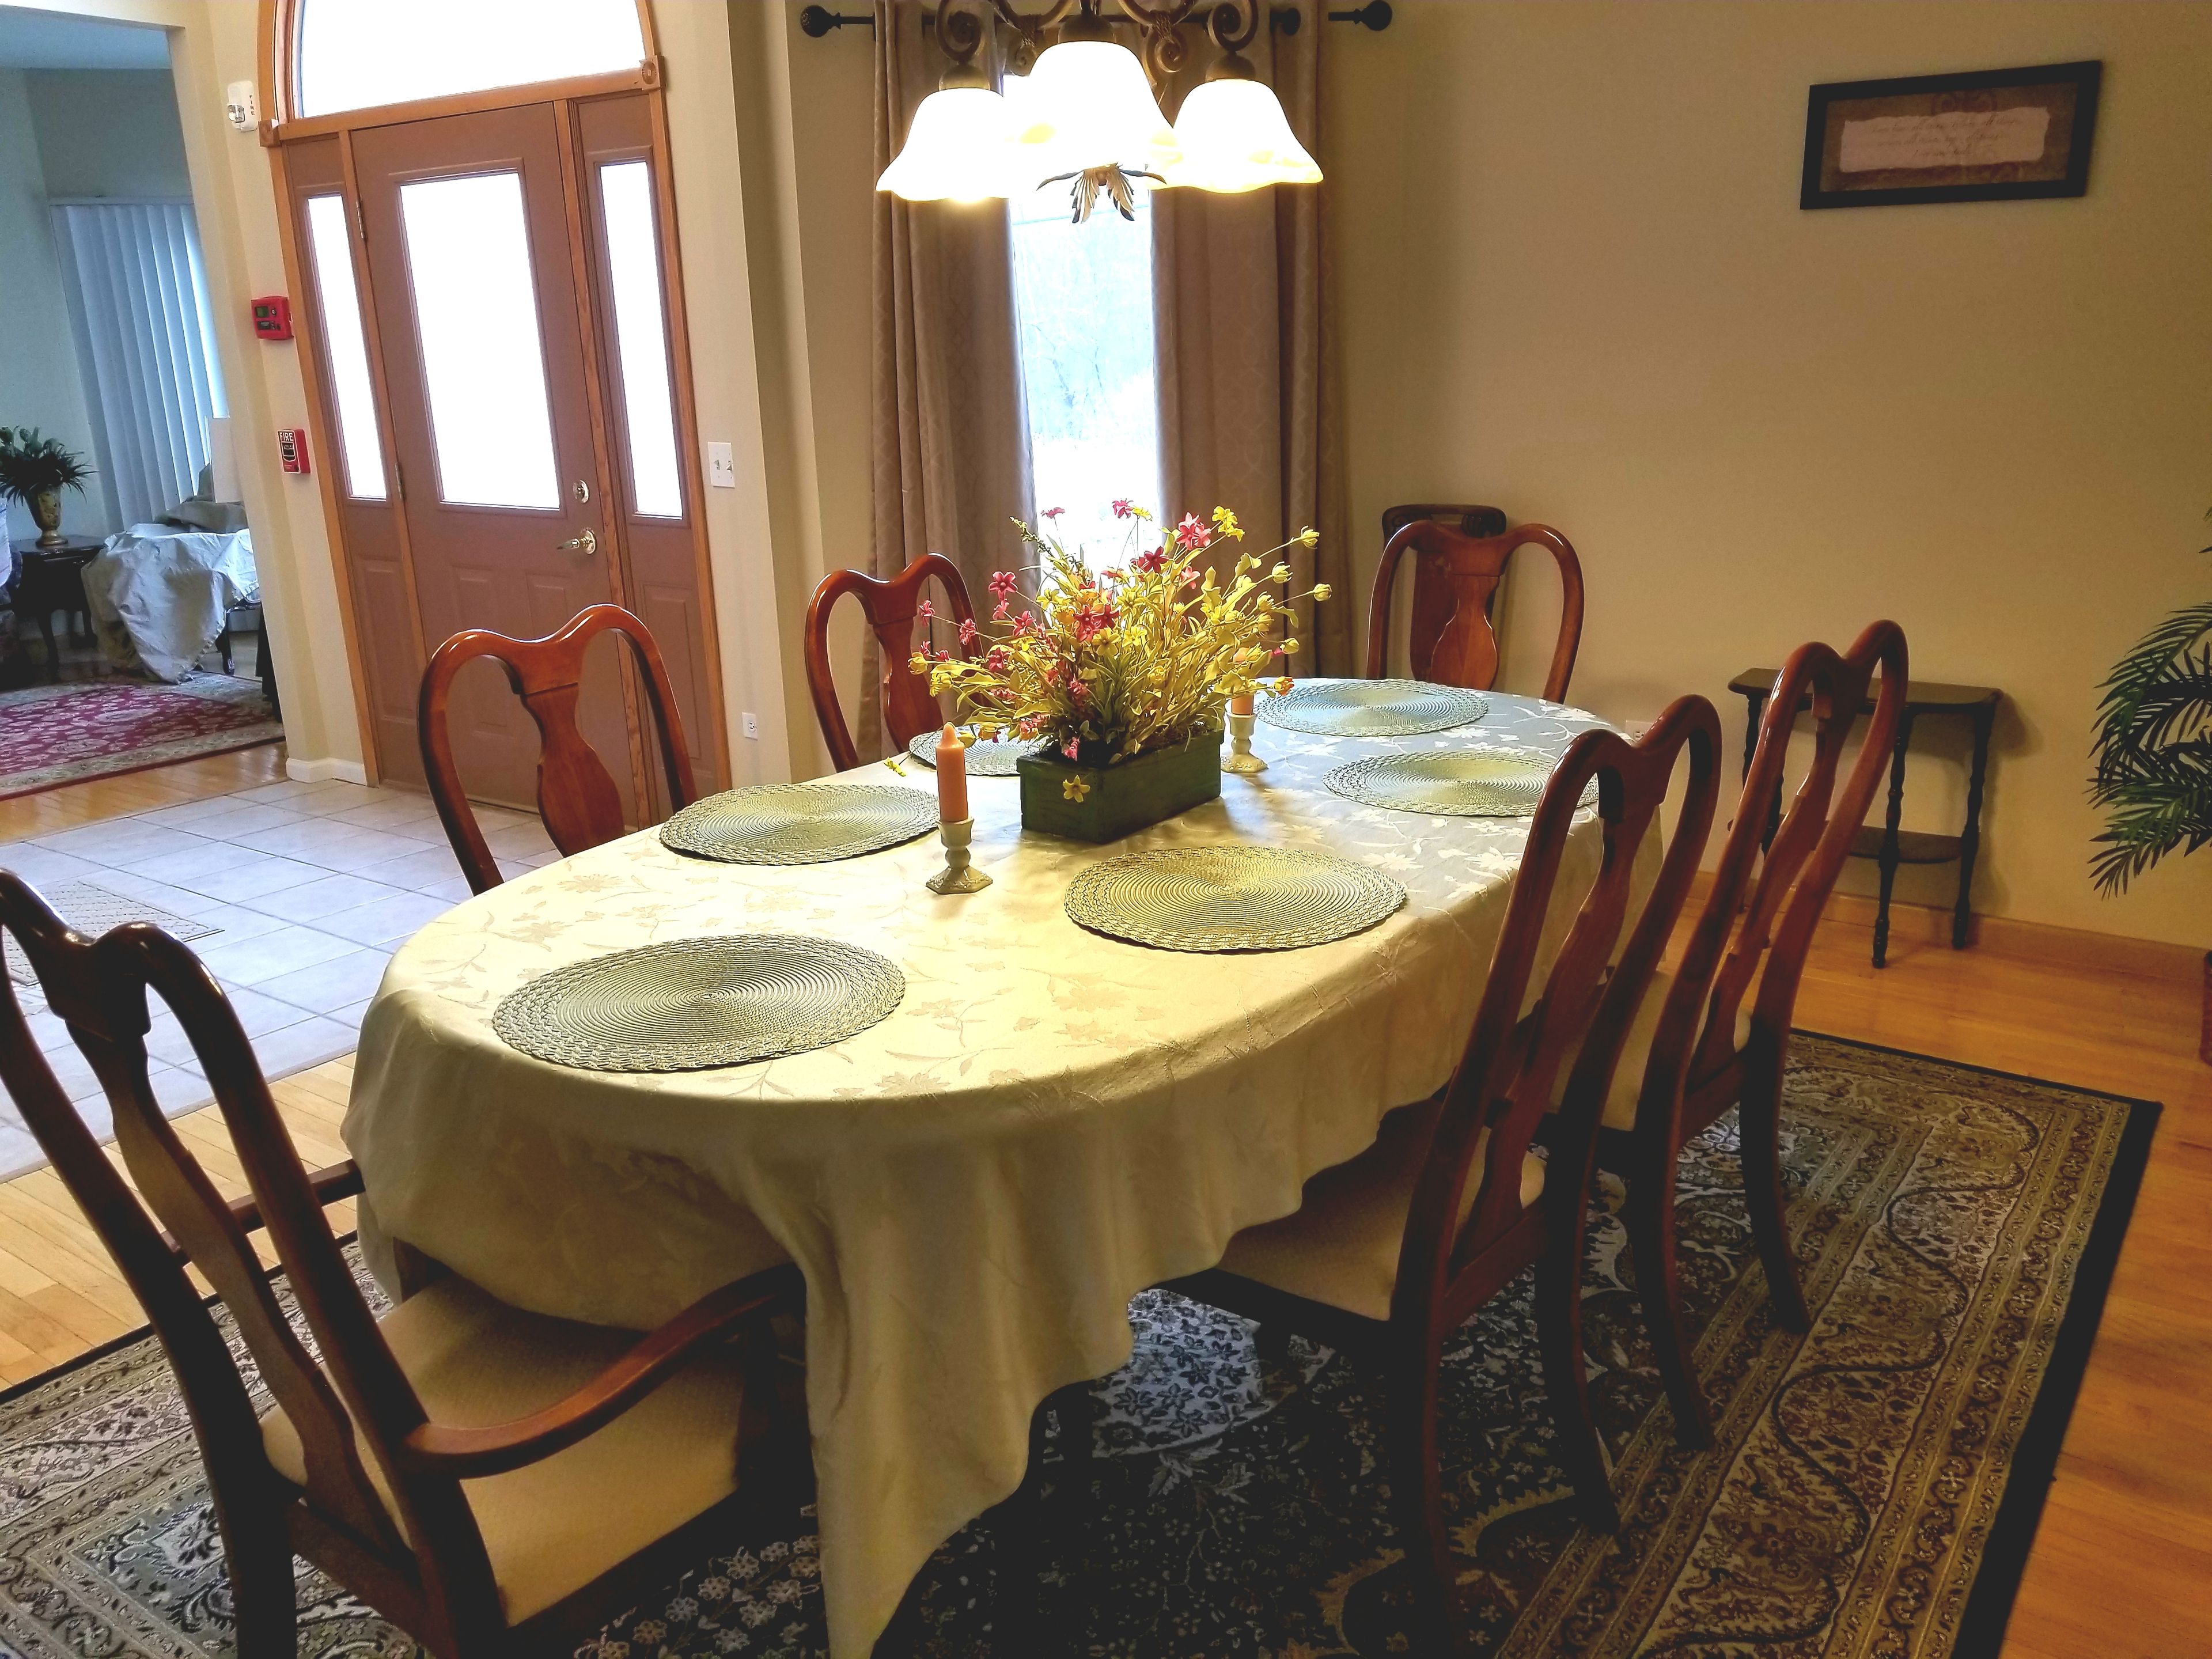 Interior view of Willow Crossing Senior Living featuring dining room with wooden furniture and home decor.